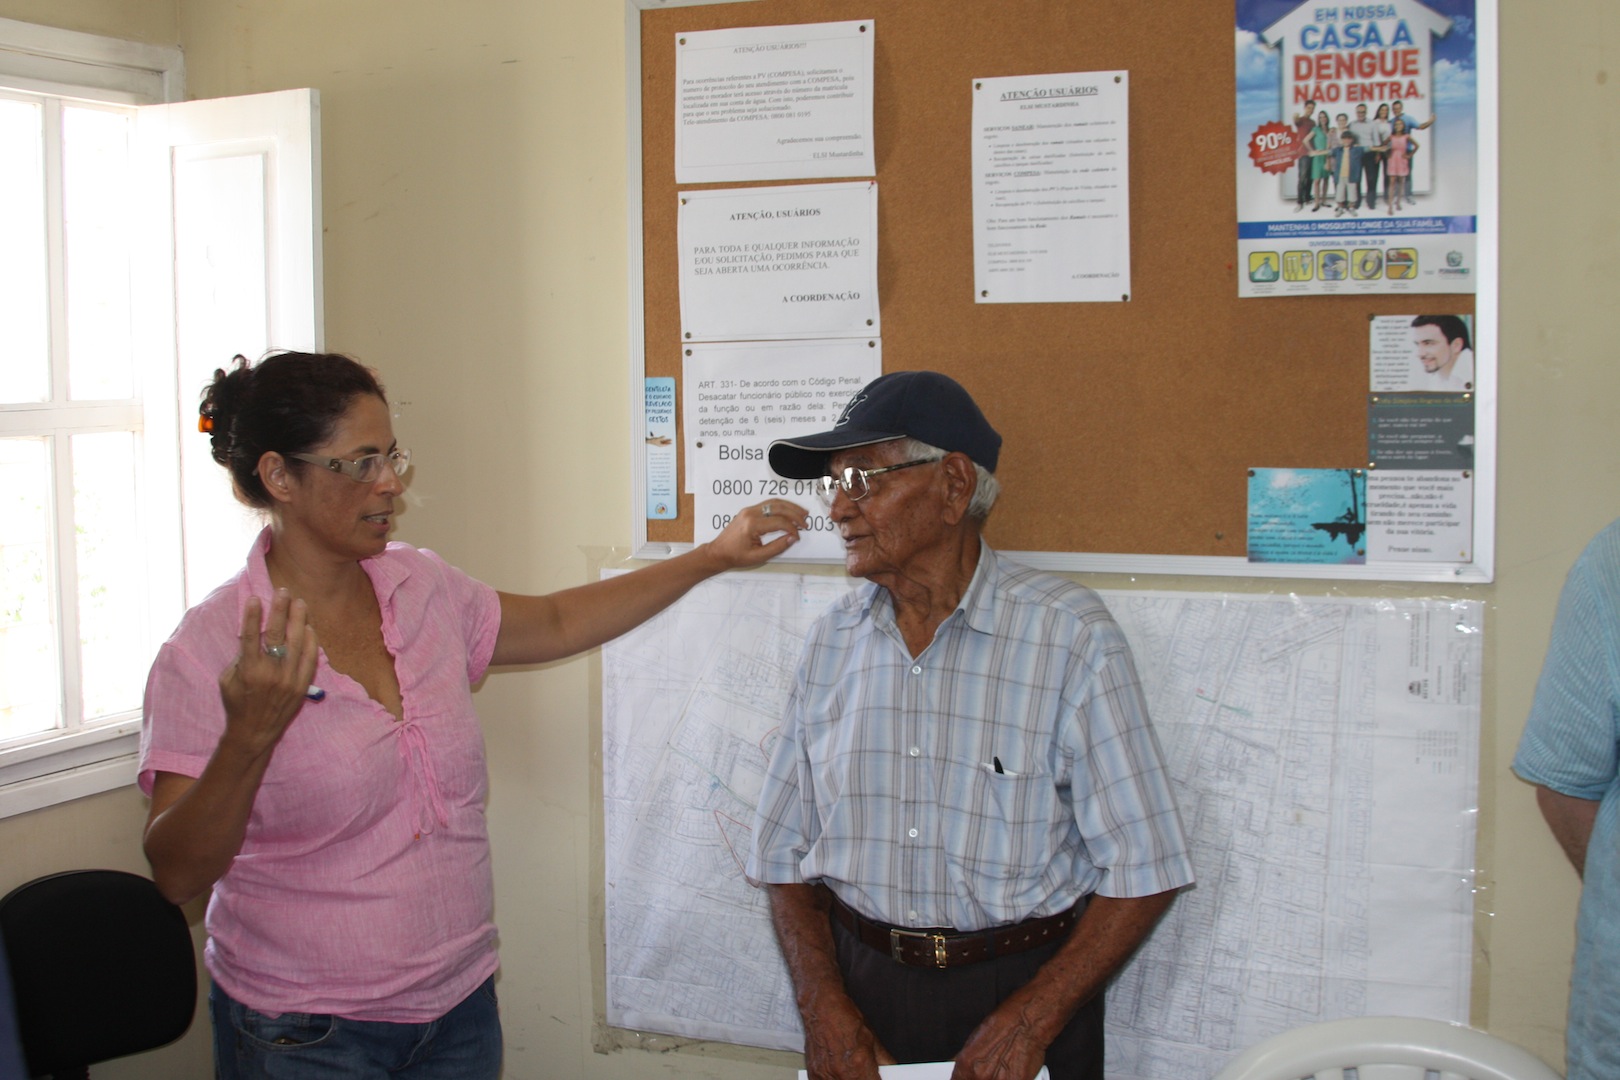 Visit to Mustardinha 1, site of the community's association